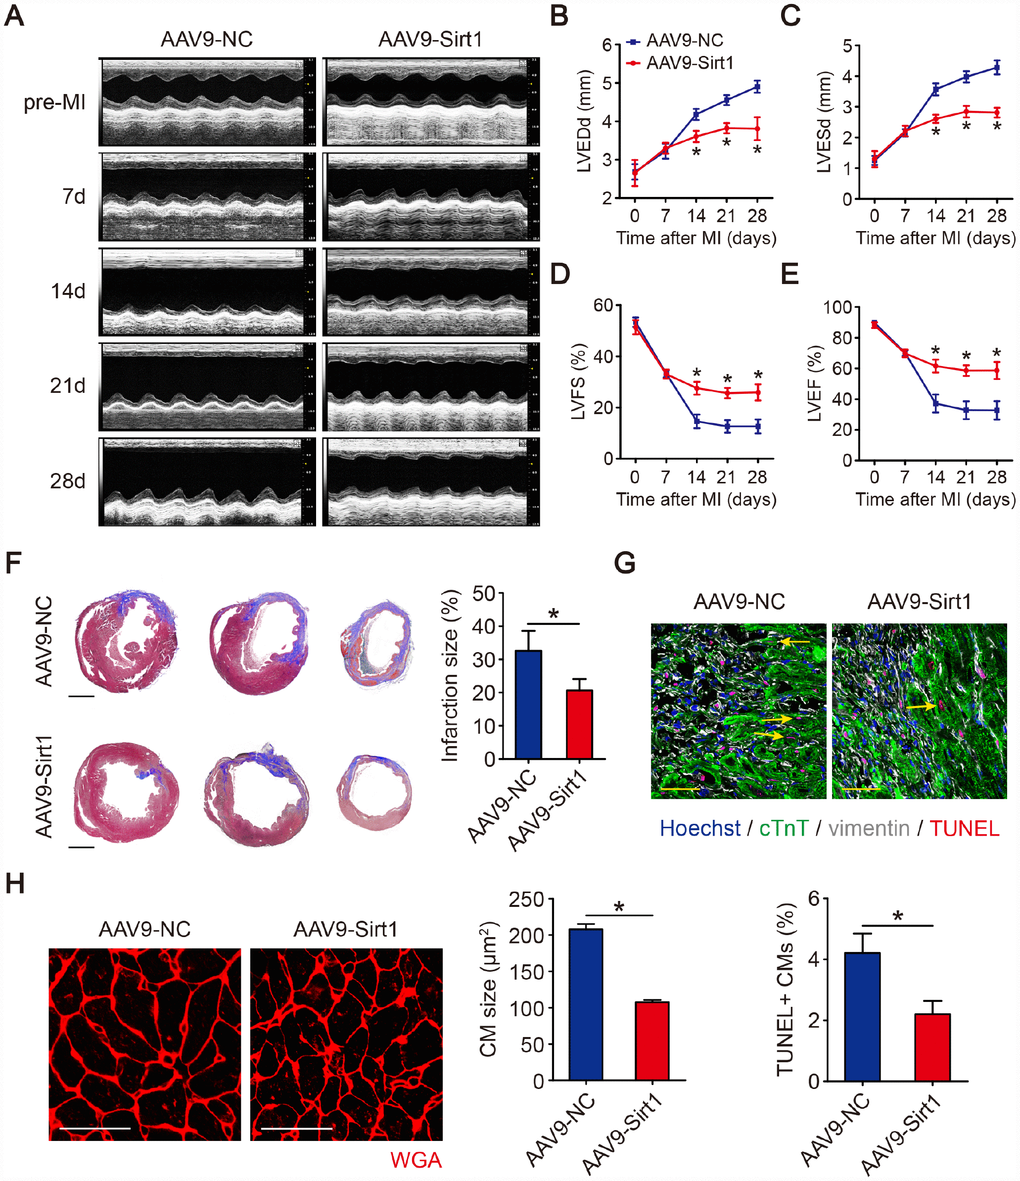 Sirt1 induces cardiac regeneration after MI in adult mice. (A–E) M-mode ultrasonic cardiography changes in mouse hearts, as detected by echocardiography in AAV9-NC and AAV9-Sirt1 adult mice pre-MI and 7, 14, 21, and 28 days after MI. Quantitative analyses were performed for LVEDd (B), LVESd (C), LVFS (D), and LVEF (E) (n=5). (F) Masson’s trichrome staining of serial ventricular sections in AAV9-NC and AAV9-Sirt1 adult mice 28 days after MI. Infarction size was quantified (n=5). Scale bar, 1mm. (G) Cell apoptosis was detected by TUNEL staining and TUNEL-positive CMs were quantified in AAV9-NC and AAV9-Sirt1 adult mice 28 days after MI. Scale bar, 20μm. Quantitative analyses are representative of fields from 5 mice per group. (H) WGA staining and quantitative analyses of CMs size in AAV9-NC and AAV9-Sirt1 adult mice 28 days after MI. Scale bar, 50 μm. Quantitative analyses are representative of fields from 5 mice per group. Statistical significance was calculated using a one-way ANOVA followed by LSD post hoc test in B-E and a two-tailed unpaired Student’s t-test in F-H. *p